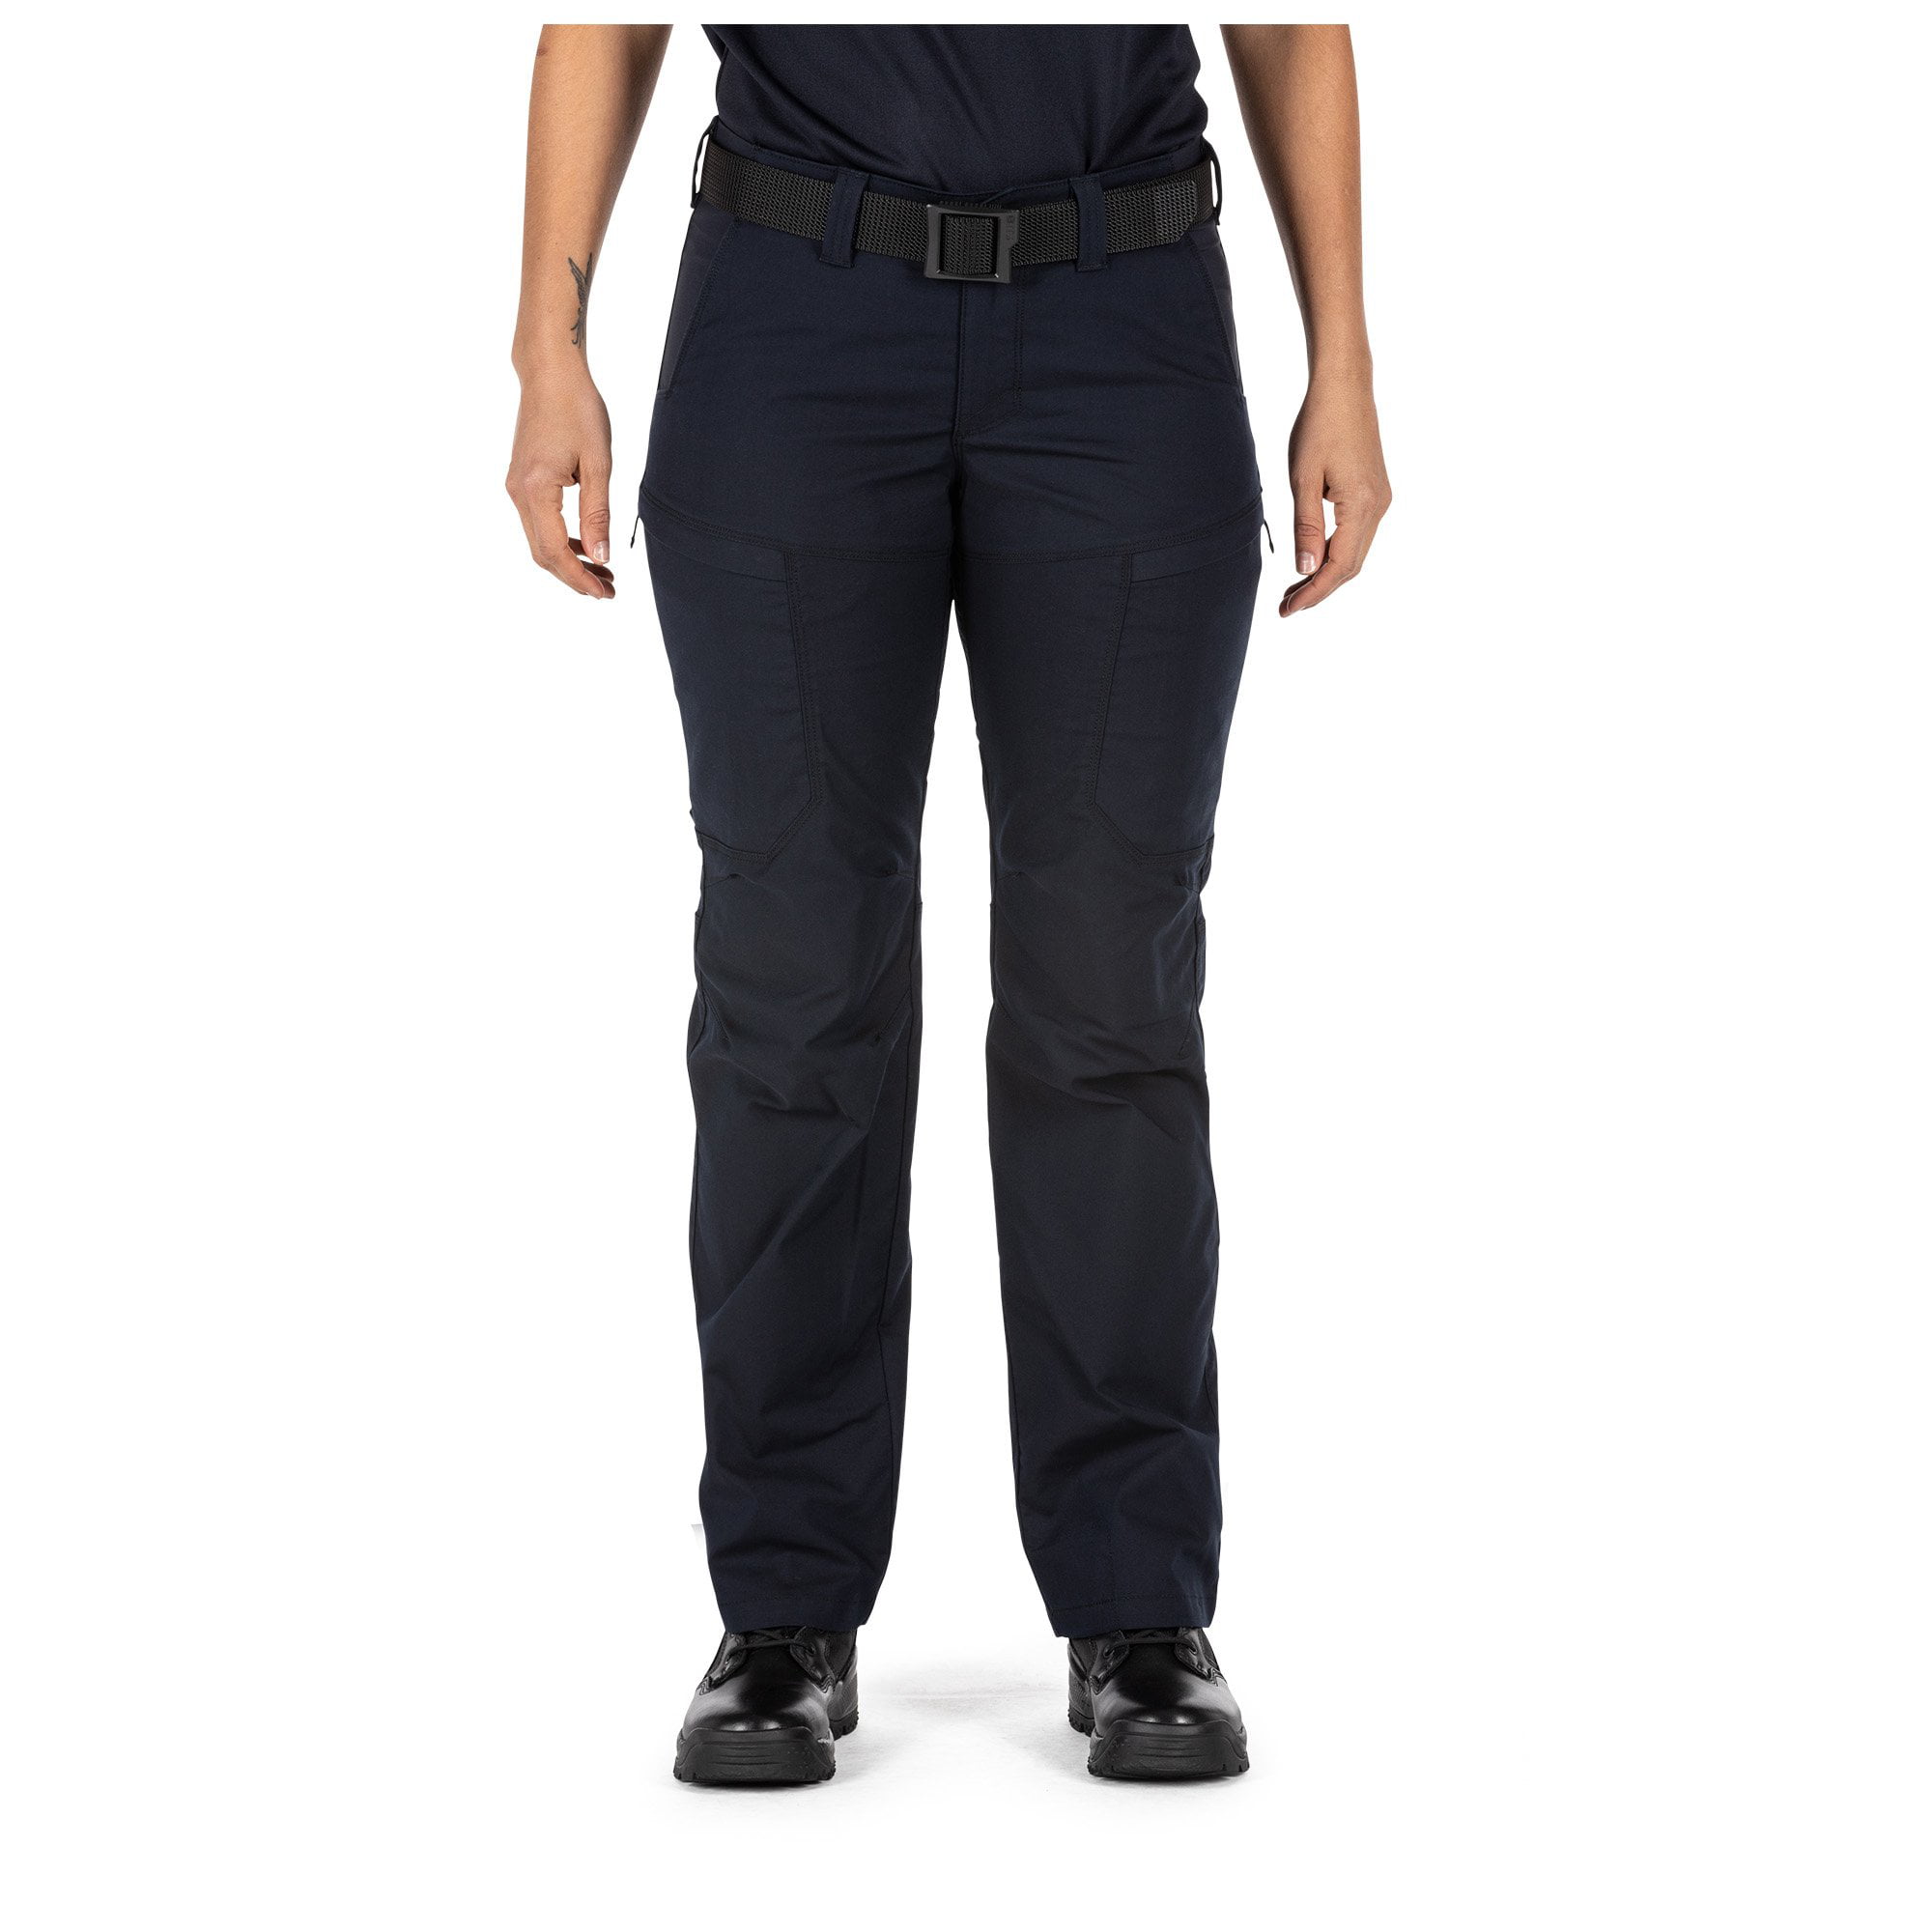 Flex-Tac Stretch Fabric Style 64446 Gusseted Teflon Finish 5.11 Tactical Women's Apex Cargo Work Pants 